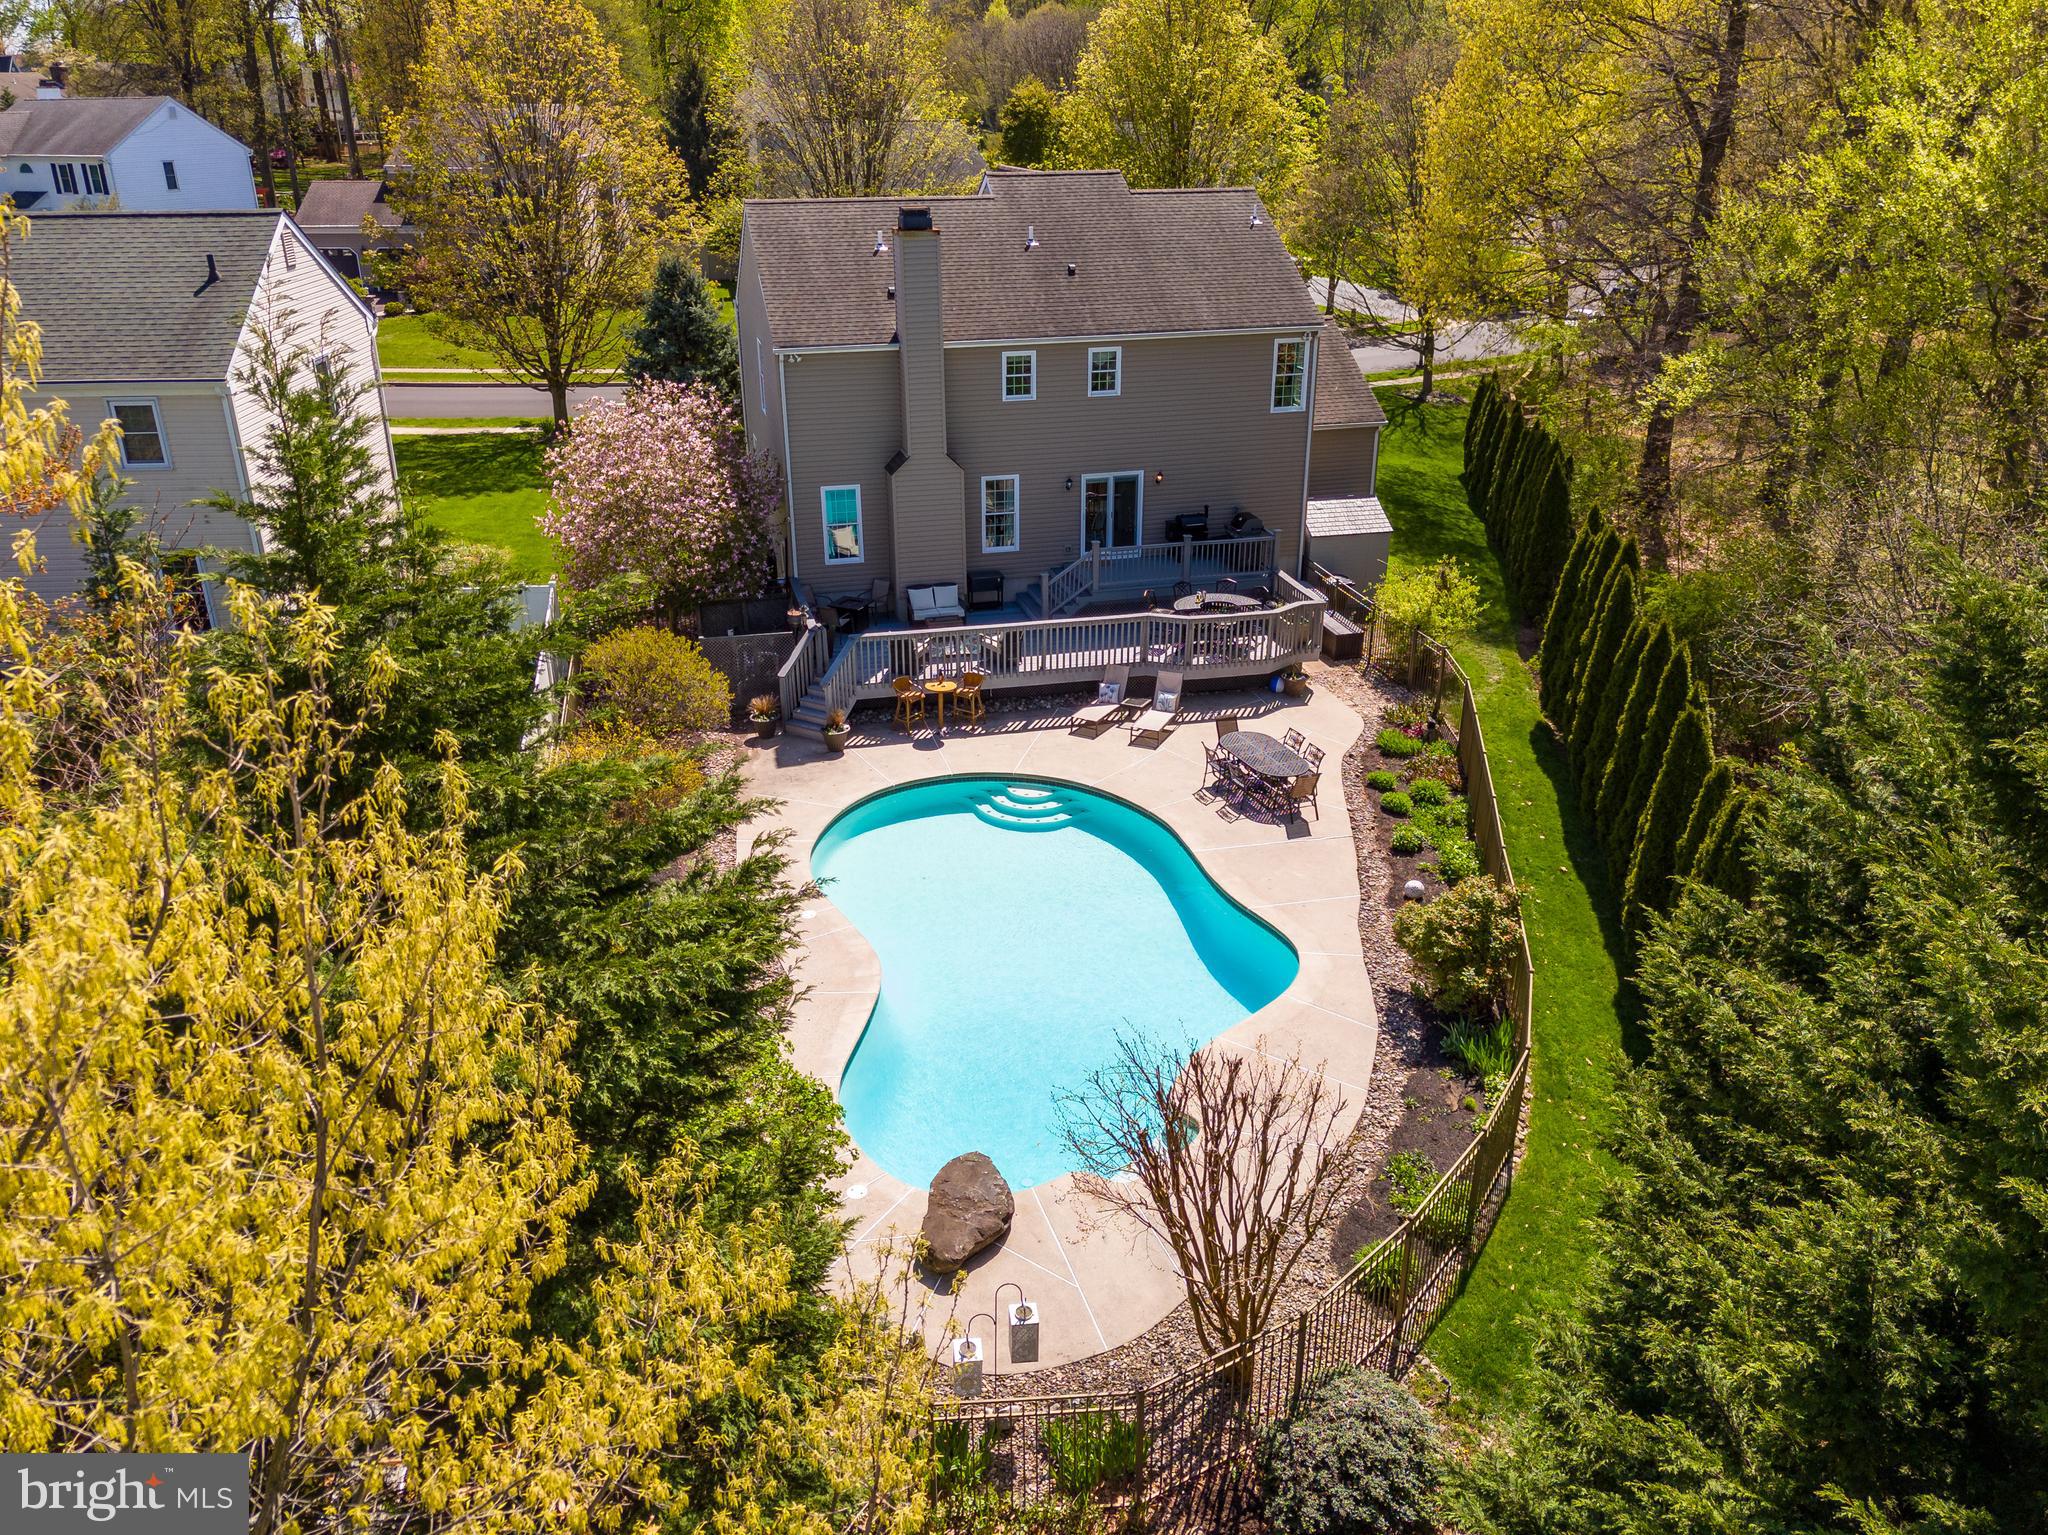 an aerial view of a house with swimming pool and 